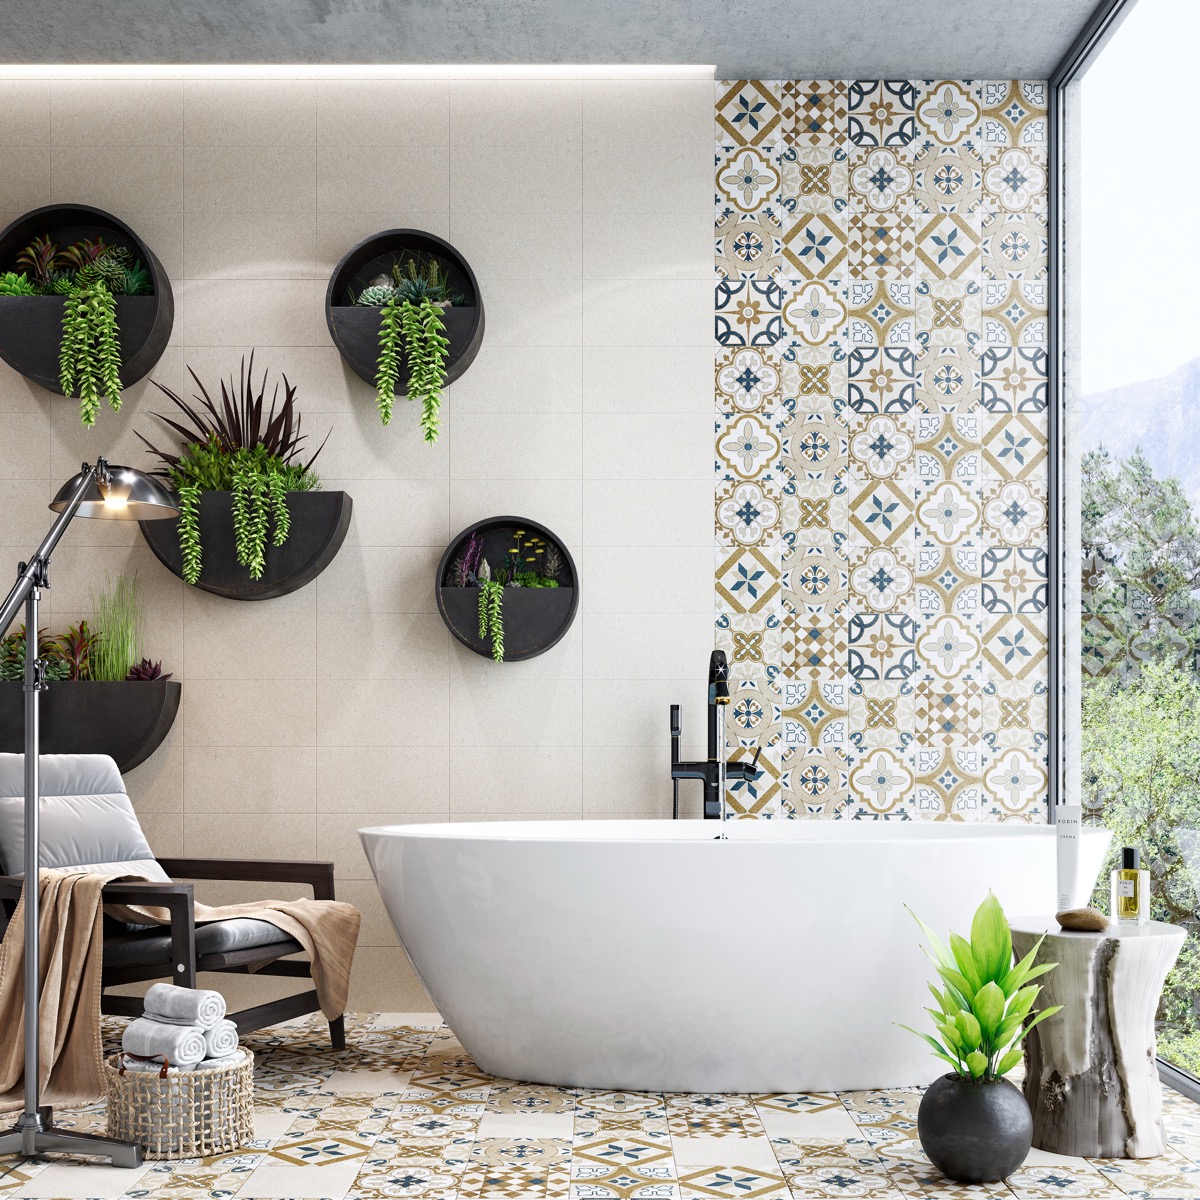 10 Modern Bathroom Design Ideas Plus How to Choose the Right One - 9creation